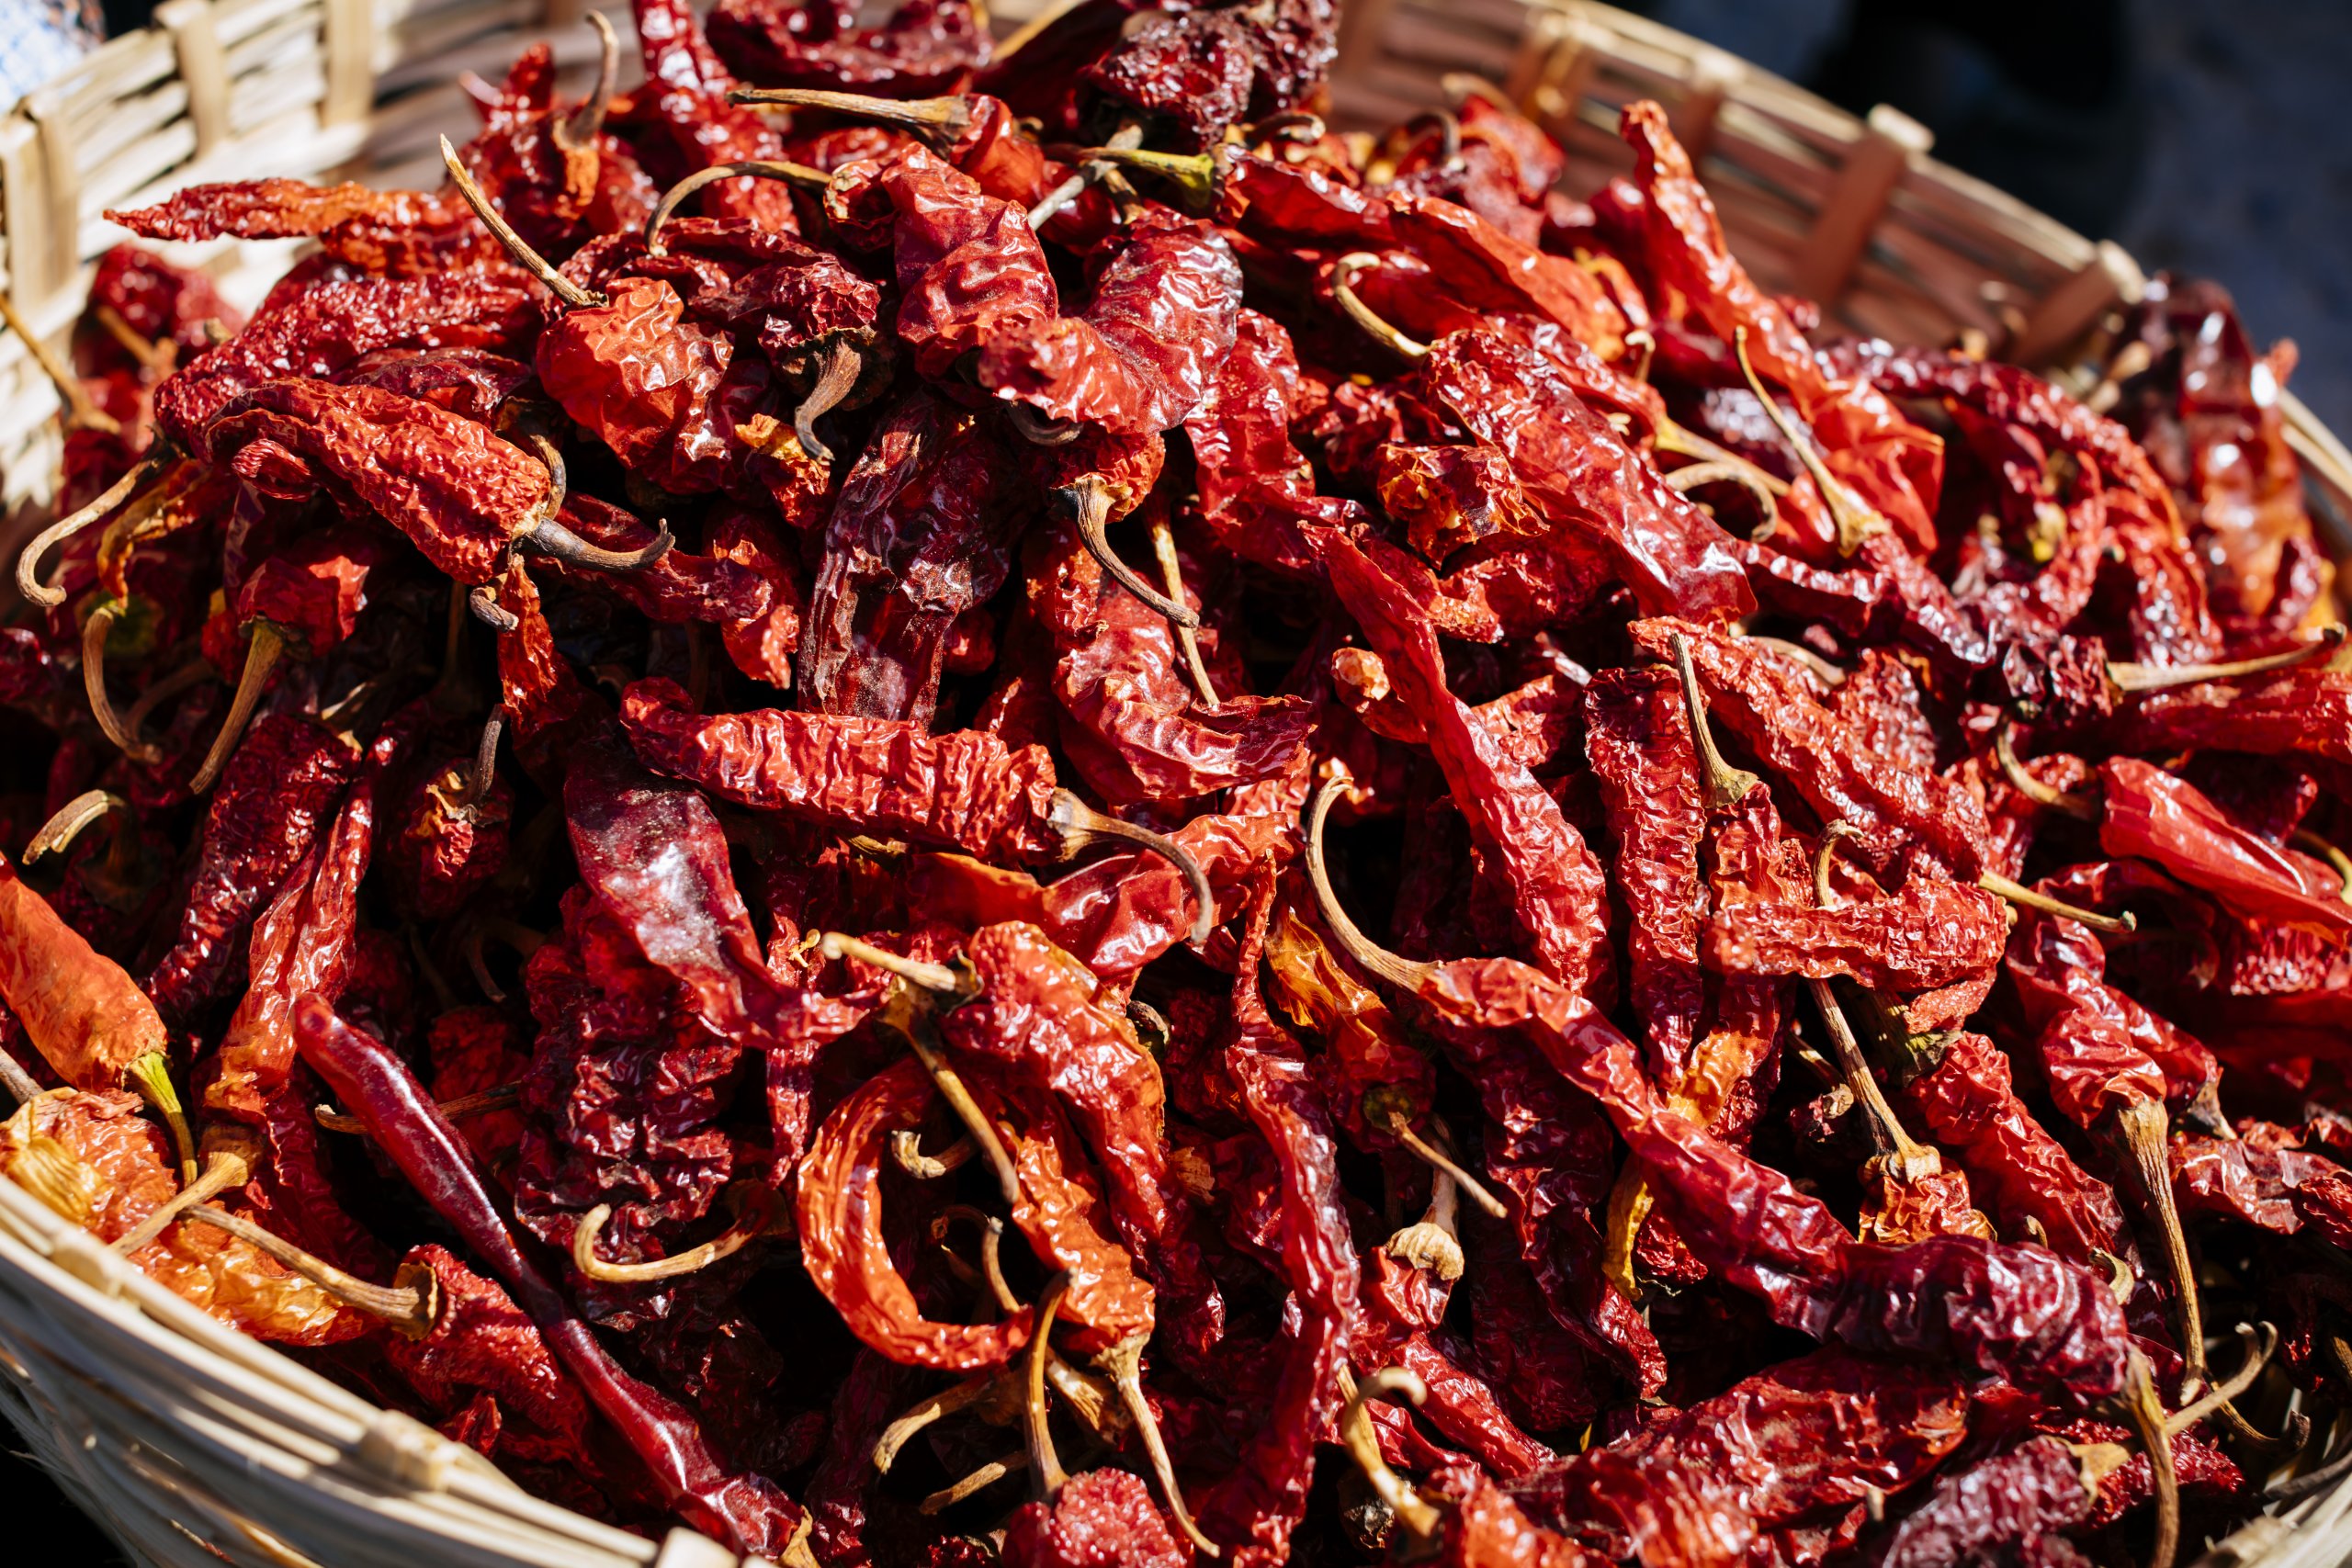 Dried chili peppers for sale at Paro”u2019s weekend market